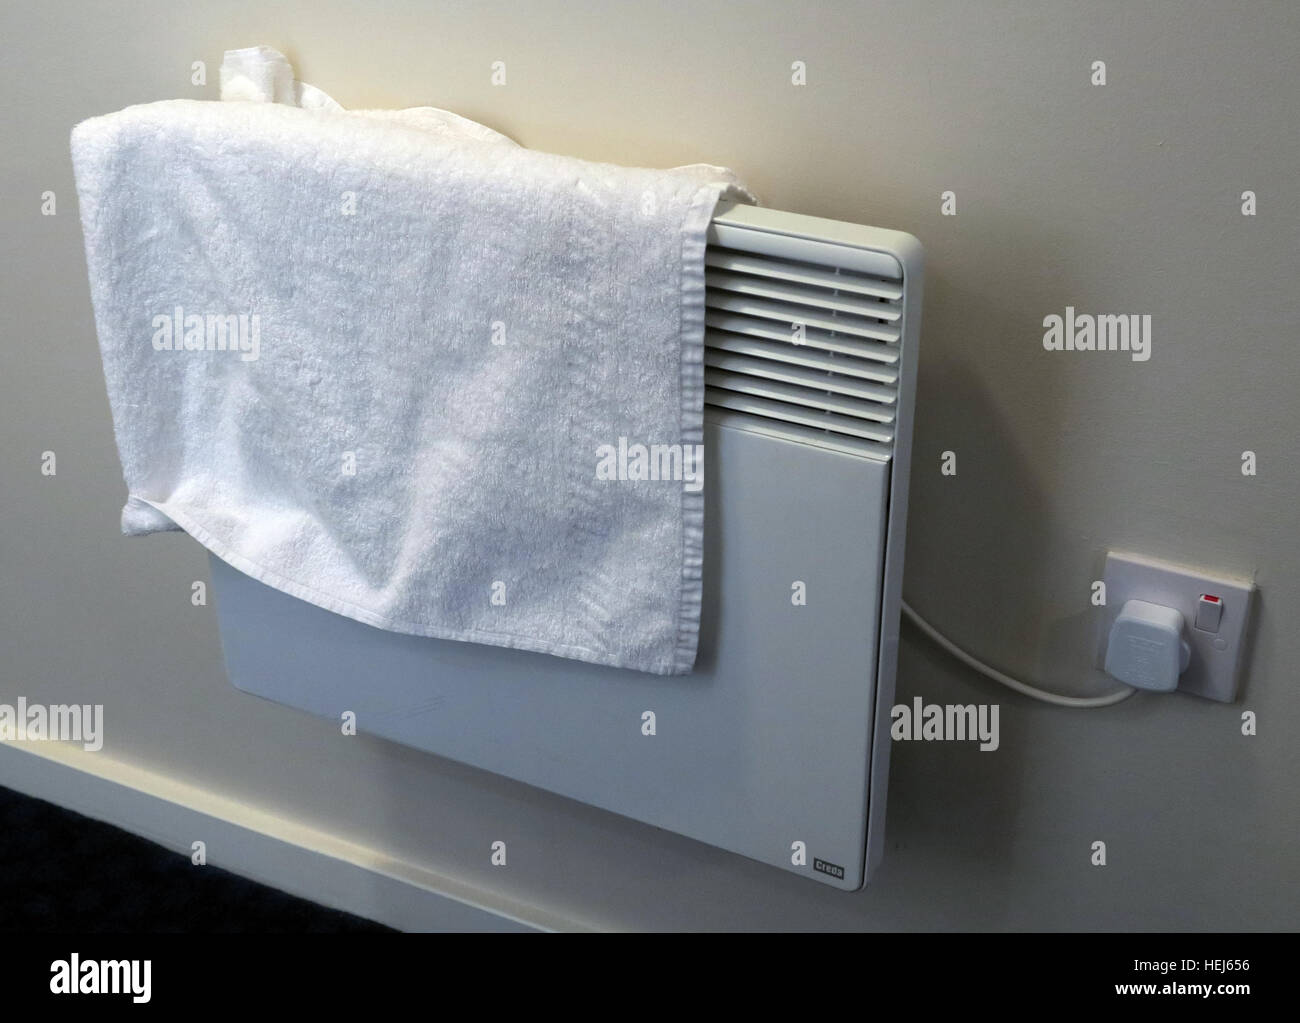 Drying towels or clothes on electric convection heaters,danger of fire Stock Photo